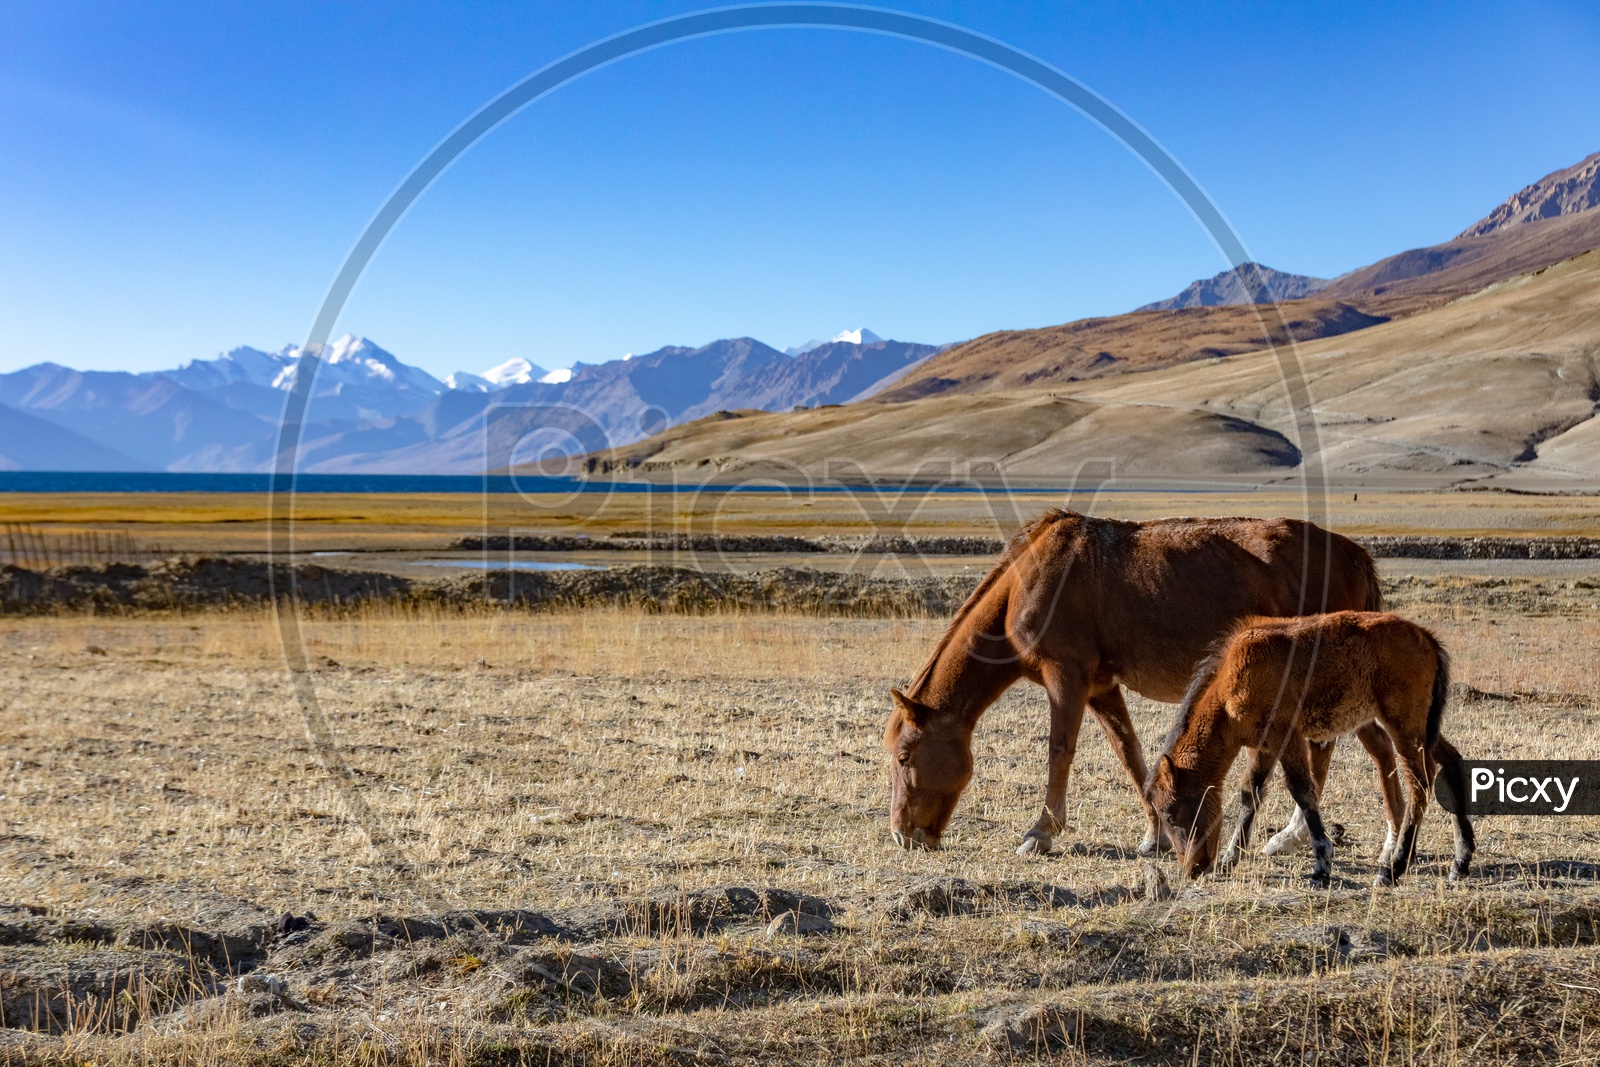 Foals grazing in the grassland with snow capped mountains in the background